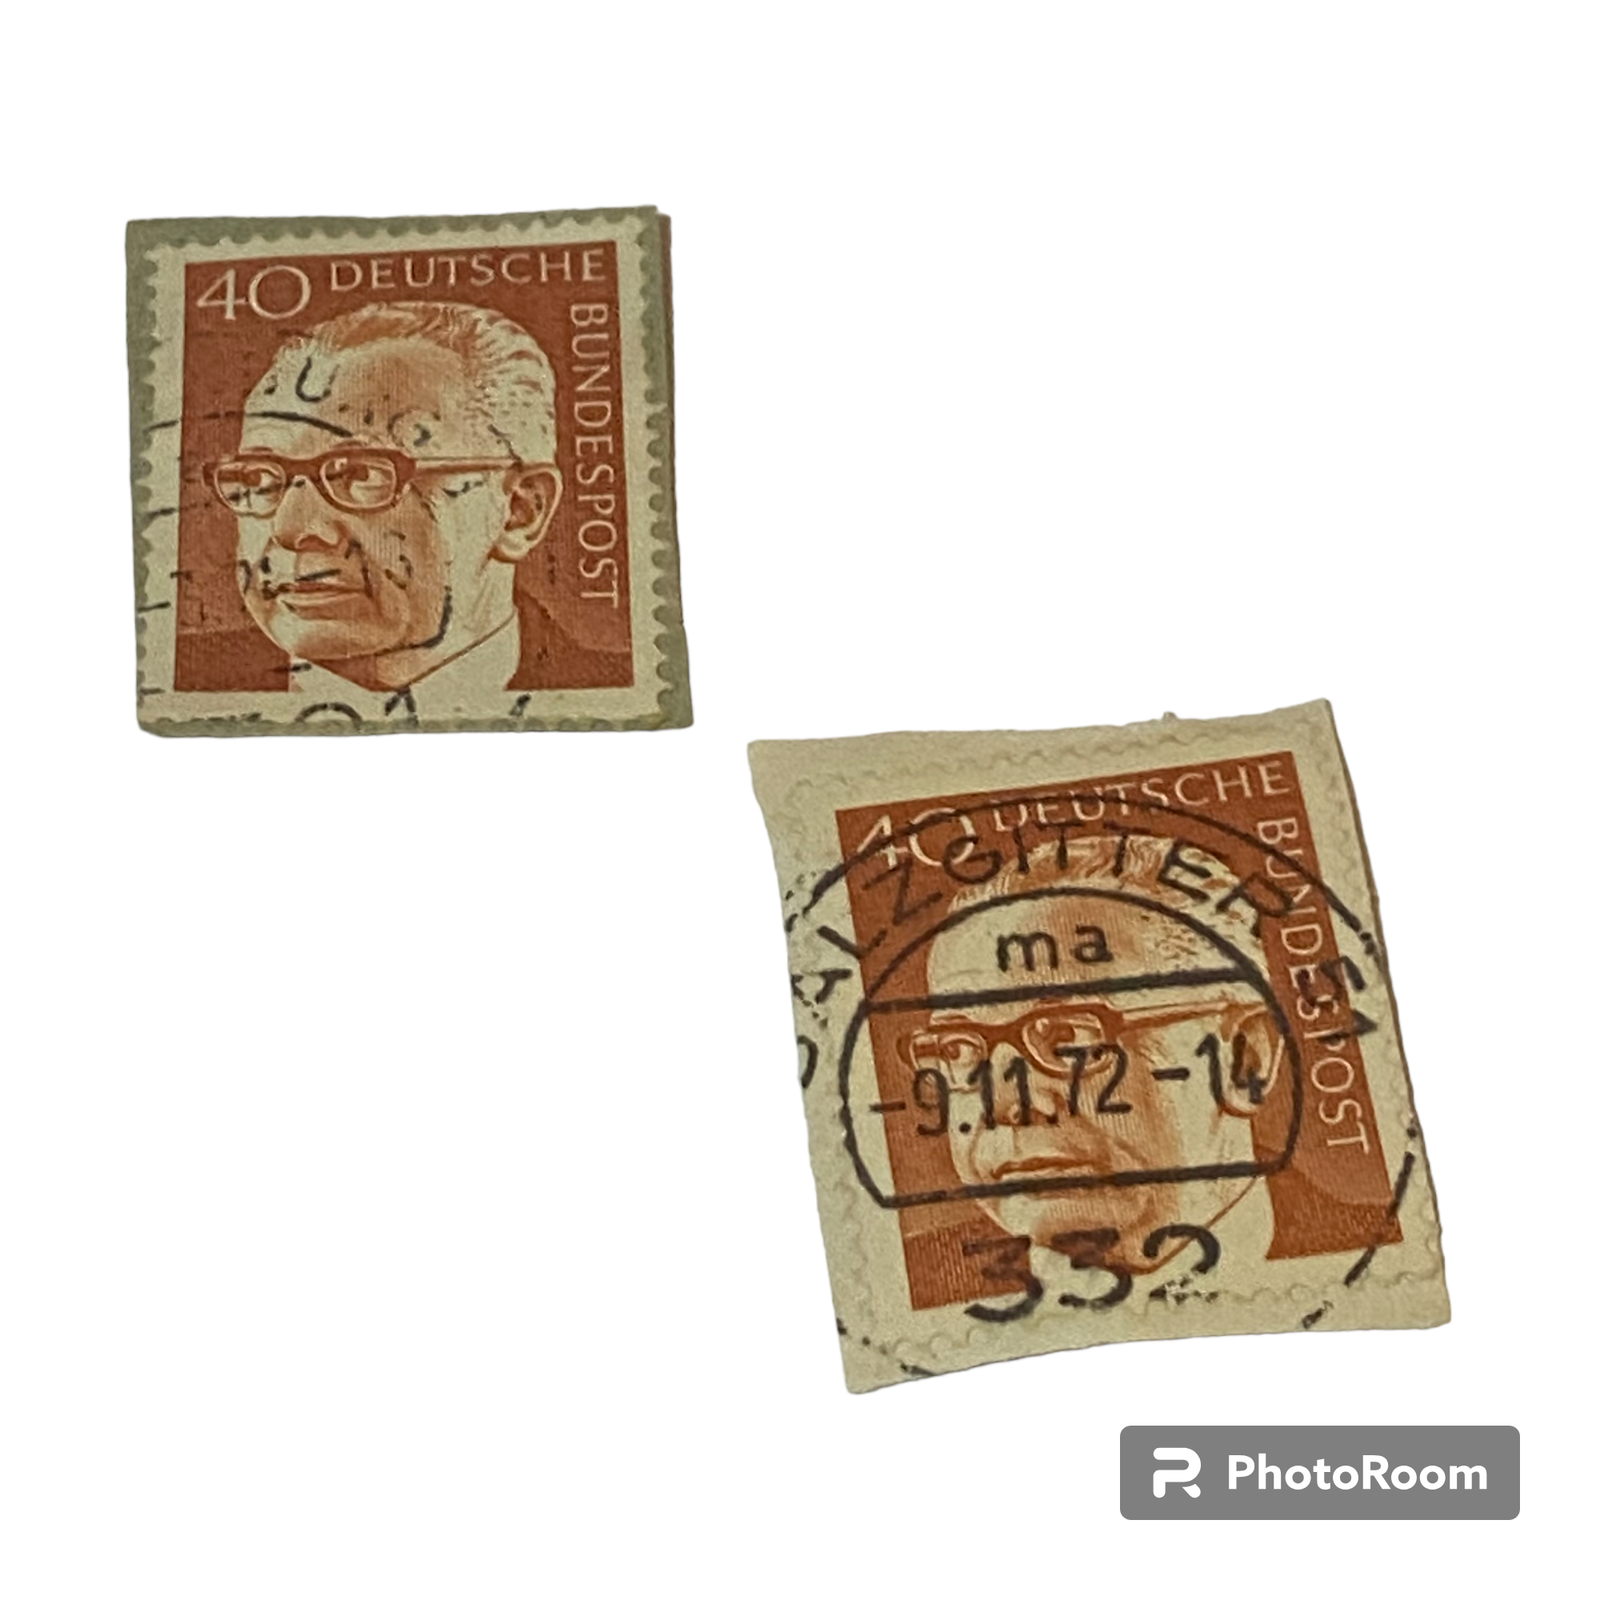 Primary image for West Germany Stamp 40 Gustav Heinemann Issued 1971 Canceled Ungraded Brown